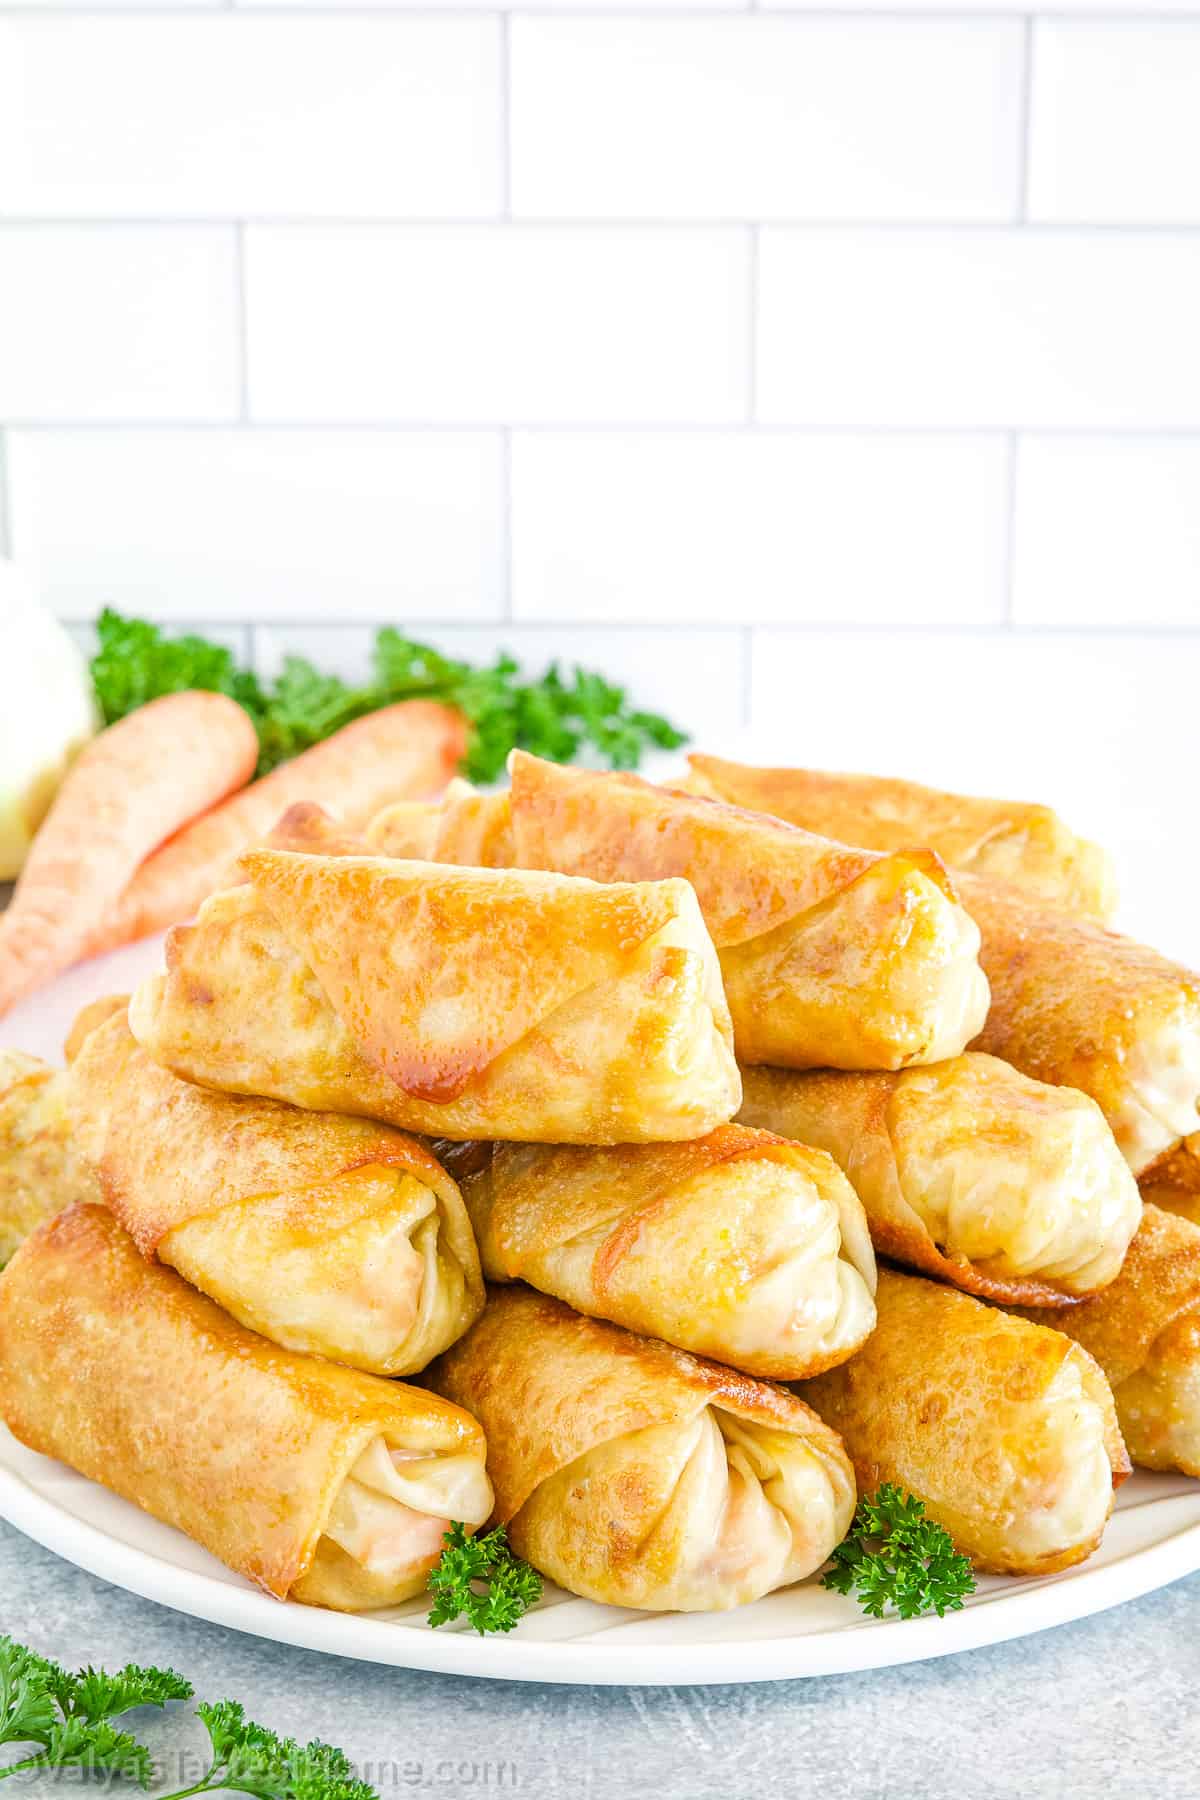 Homemade egg rolls are a popular Chinese dish that consists of a crispy, fried wrapper filled with a mixture of vegetables, meat, and sometimes noodles.